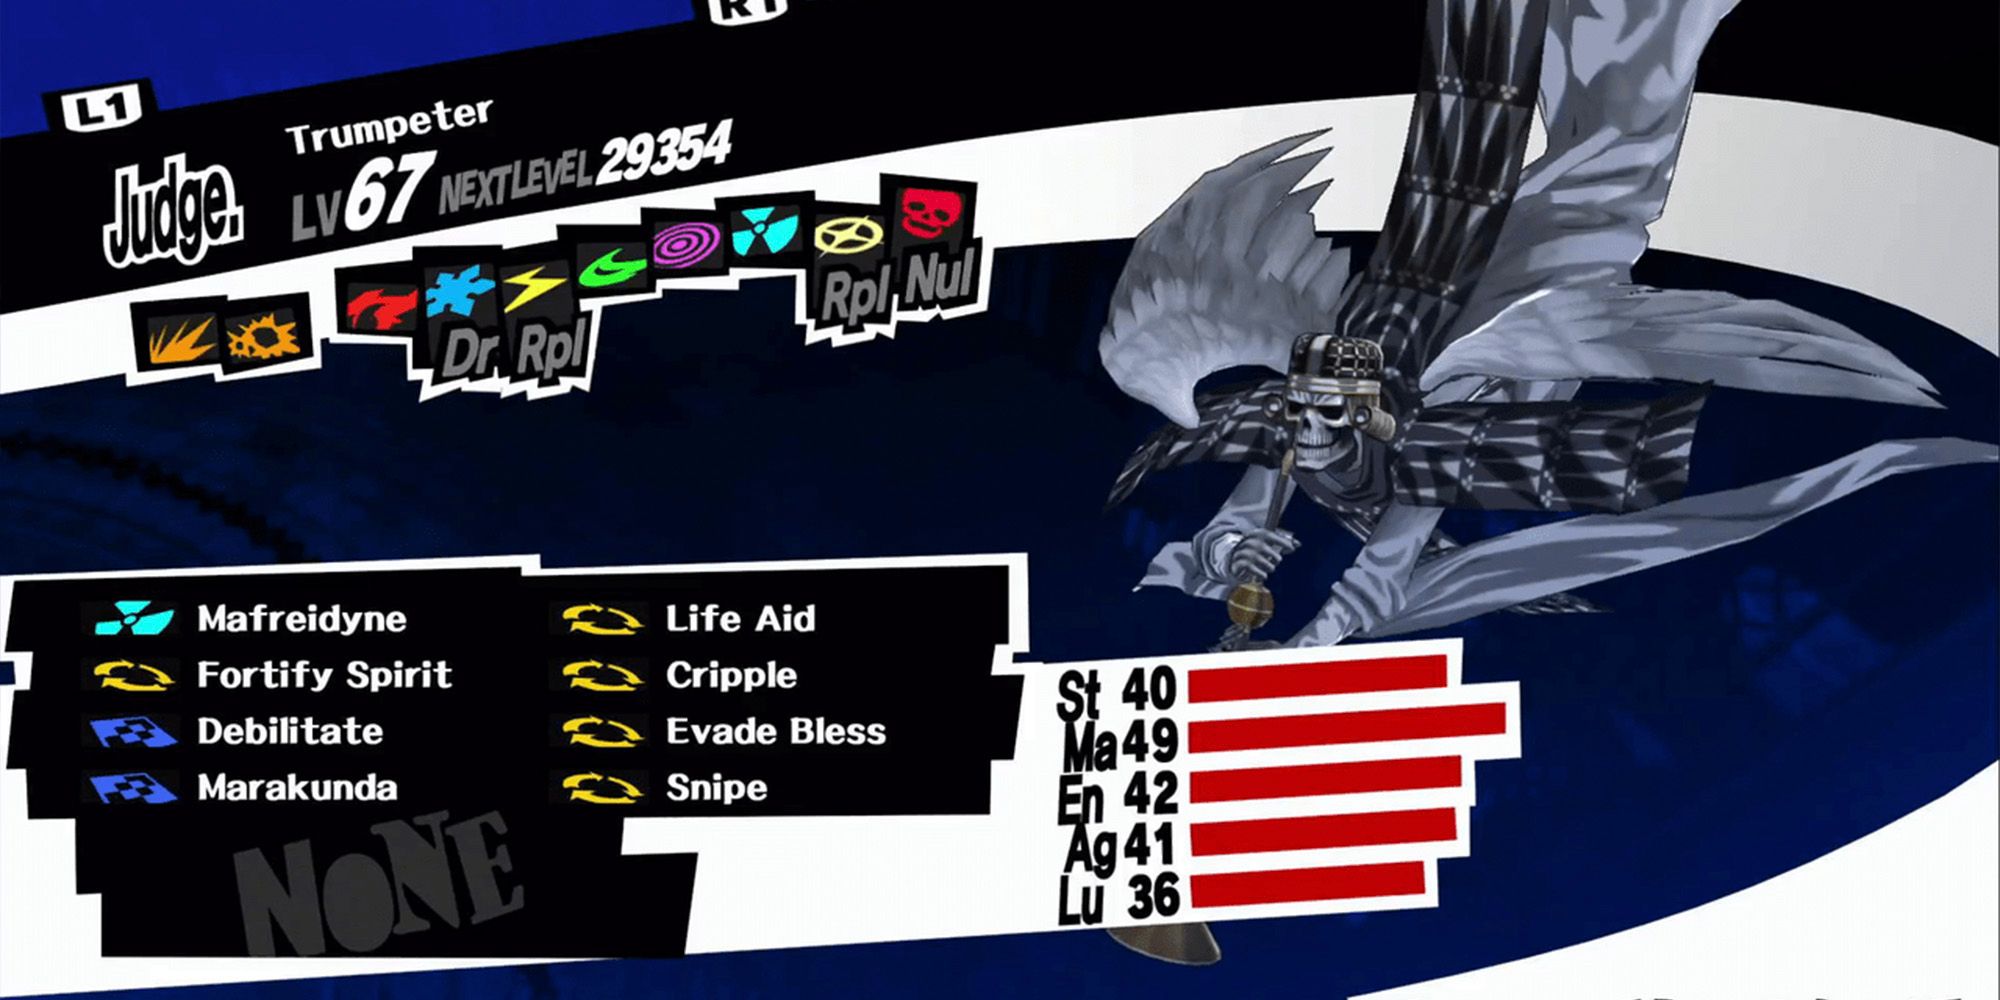 trumpeter persona 5 stat page